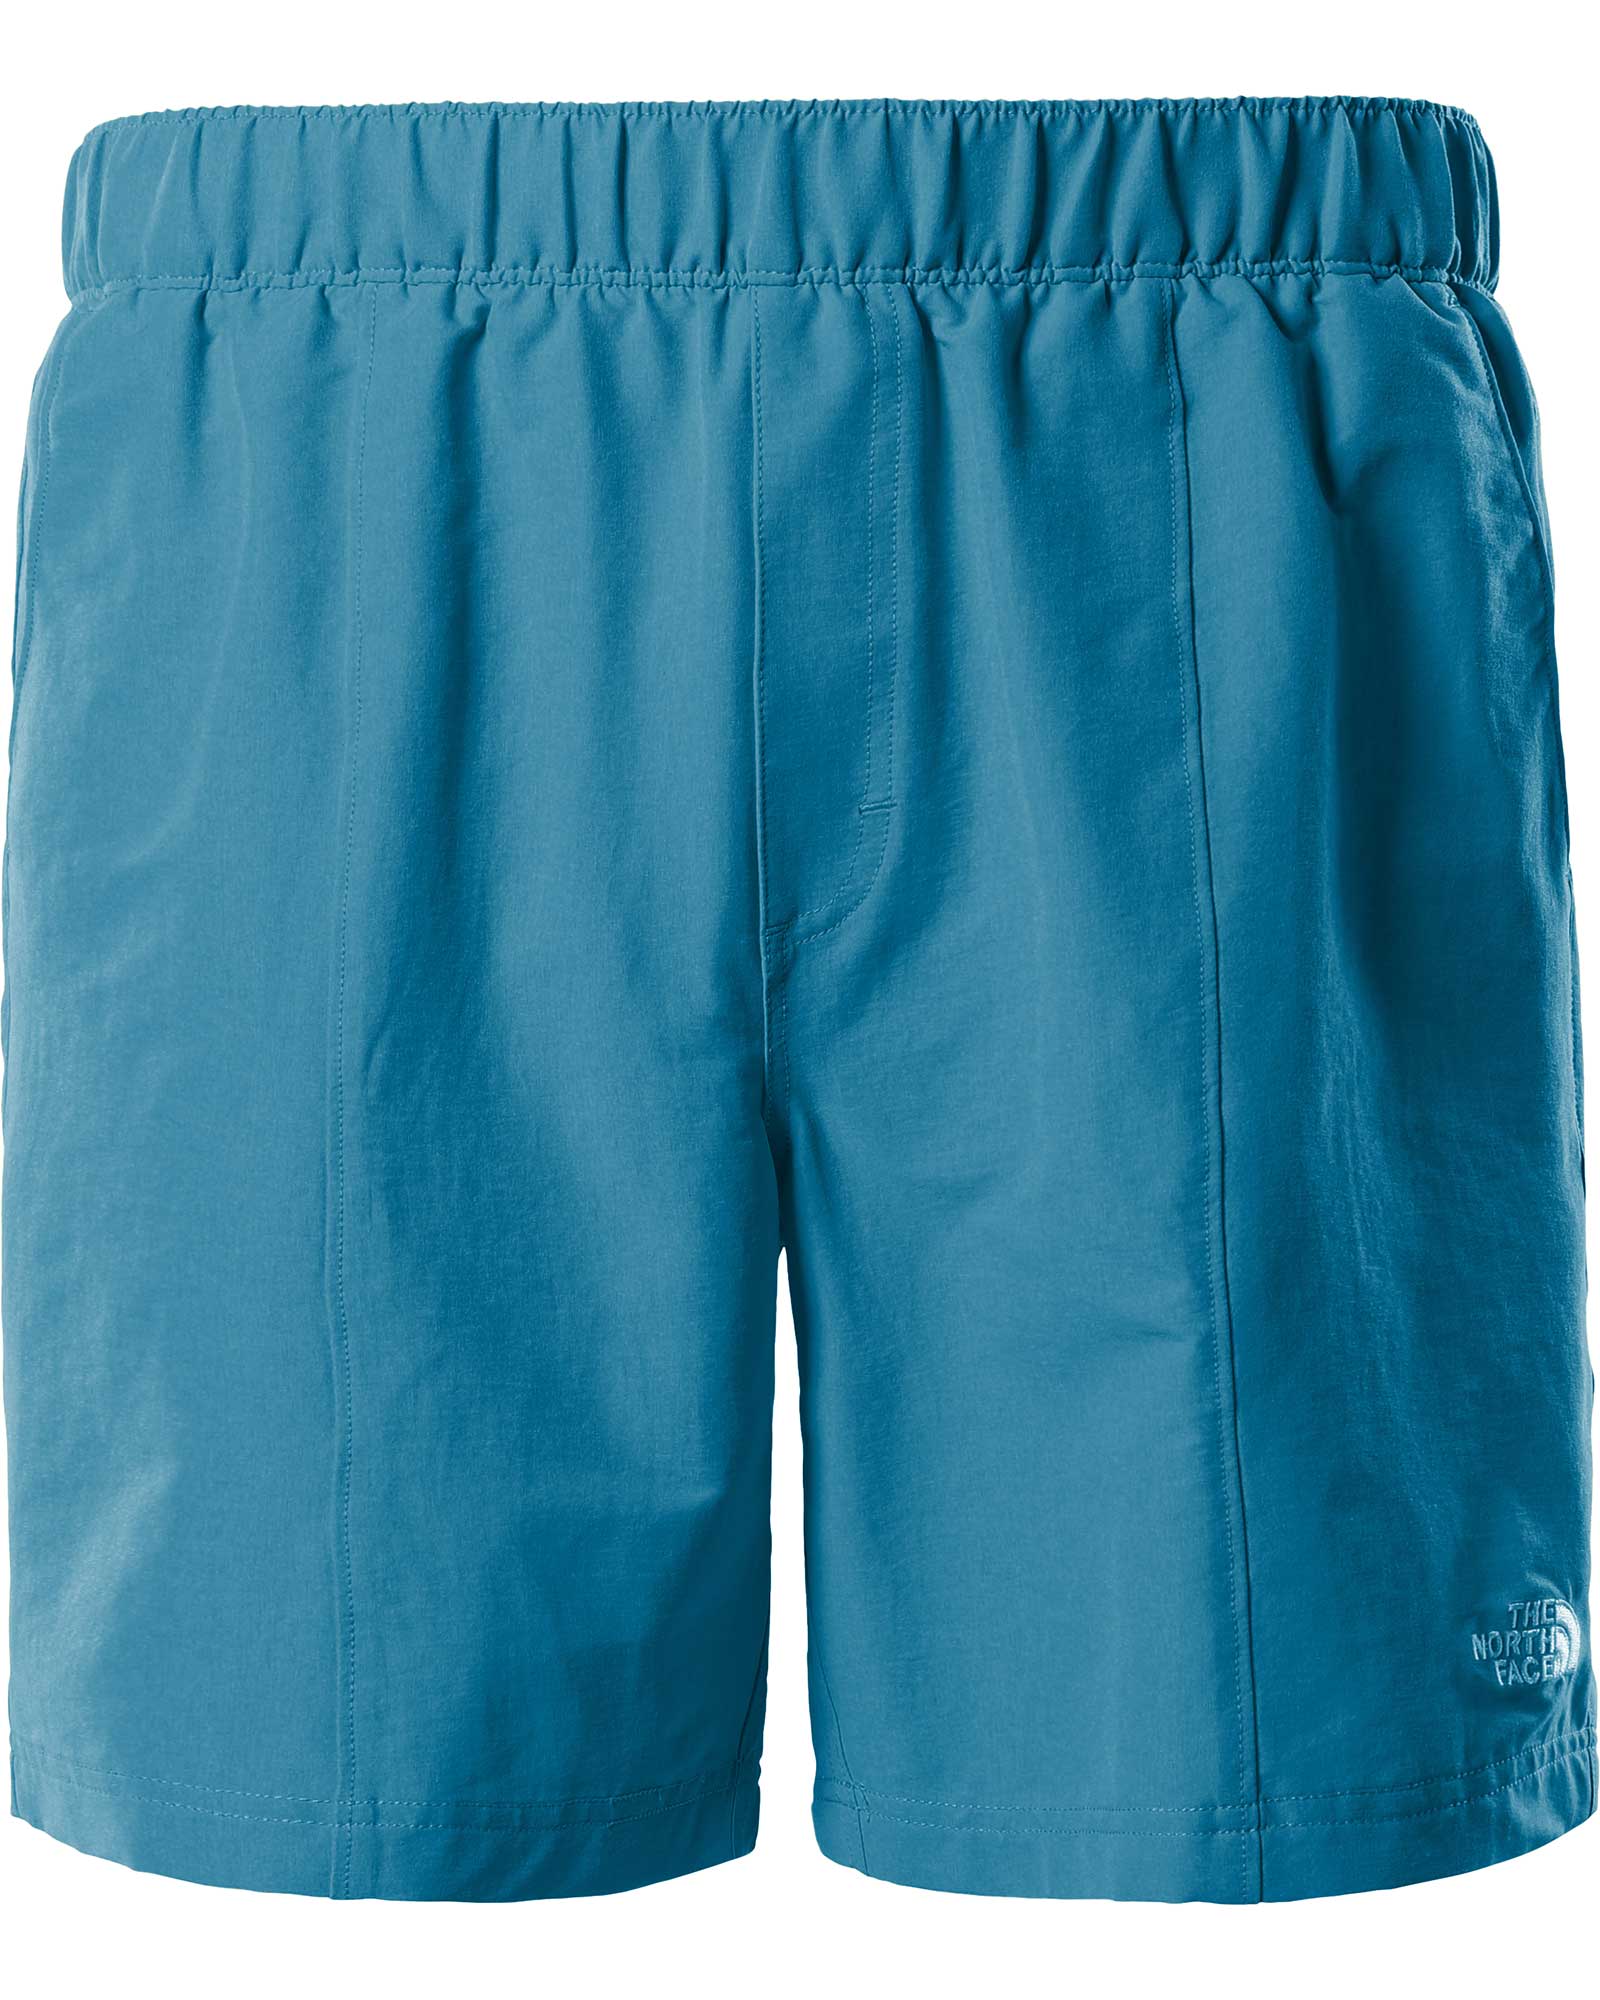 Product image of The North Face Class V Pull On Men's Shorts